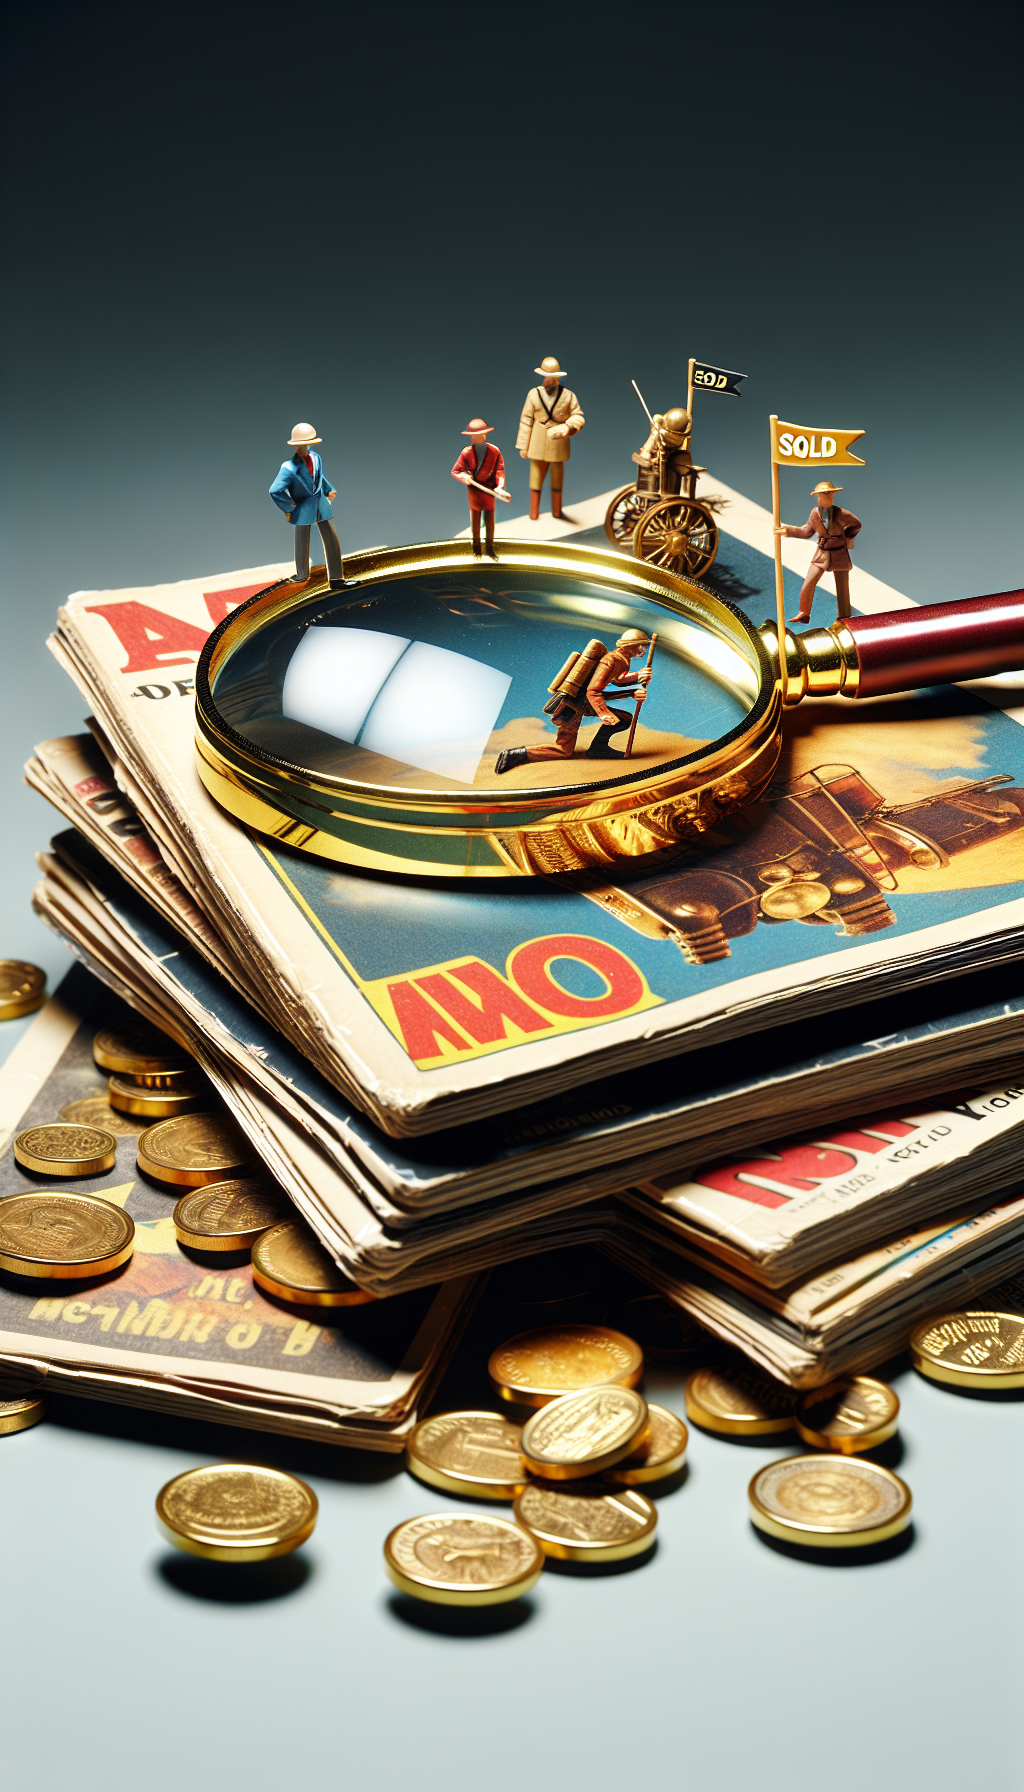 A vintage magnifying glass hovers over a stack of weathered National Geographic magazines, with golden glints signifying increased worth as they radiate from select issues. Among the pile, miniature figures embark on a treasure hunt, with one appraising a cover while another waves a "SOLD" flag from atop a magazine, symbolizing the successful sale of these valued collectibles.